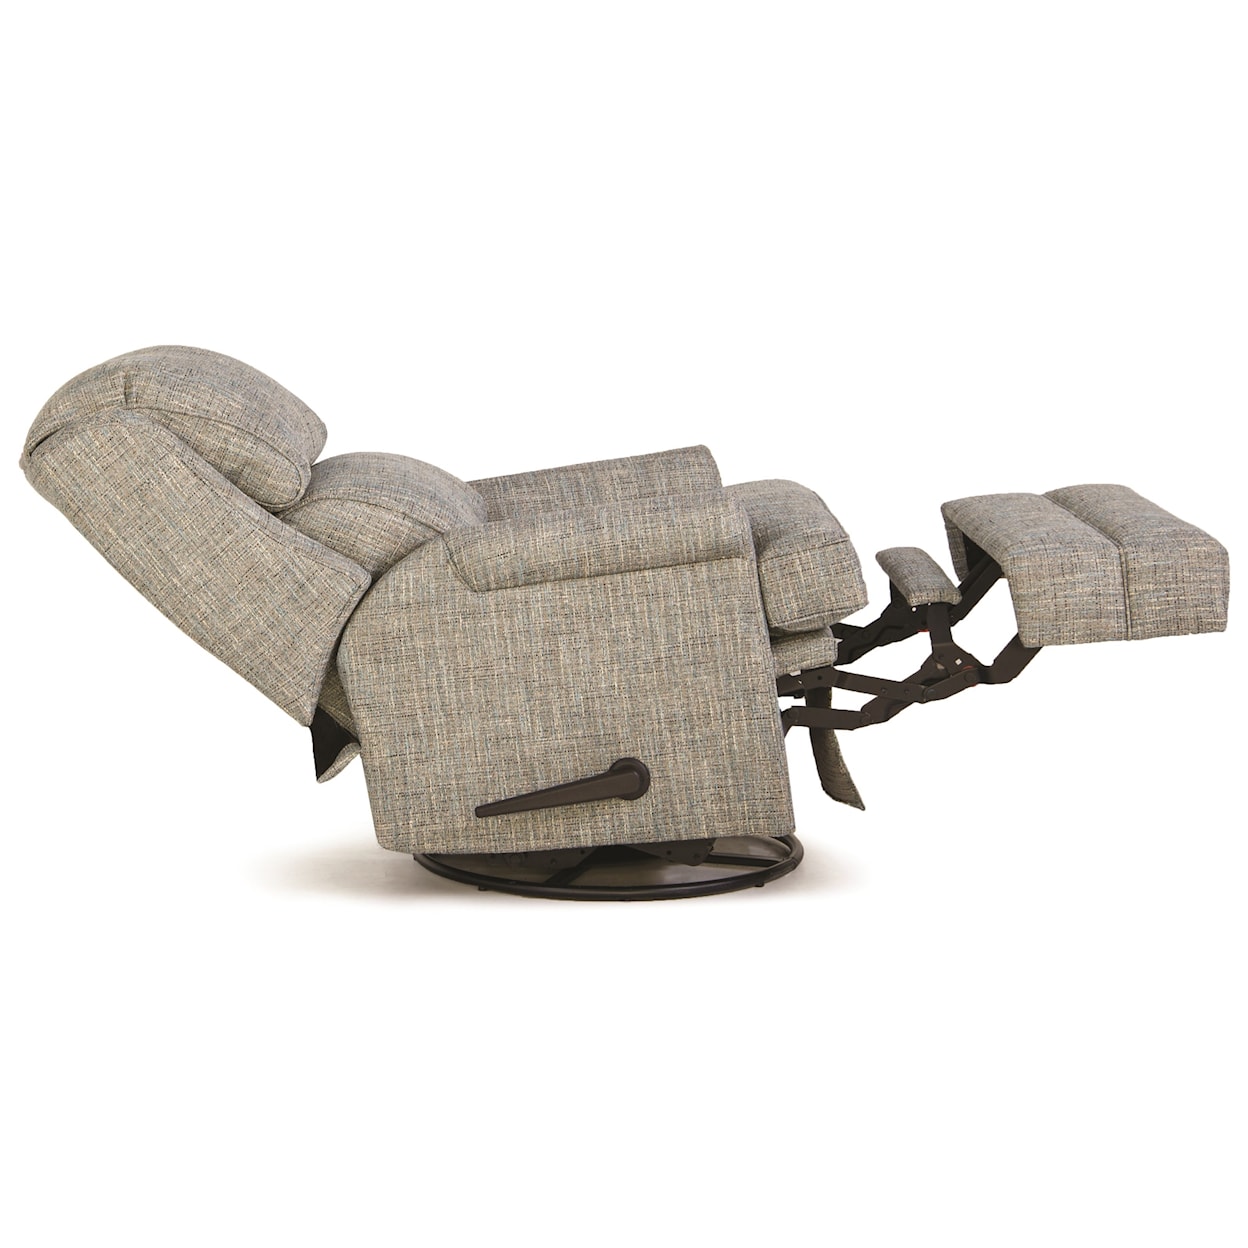 Smith Brothers 707 Recliner